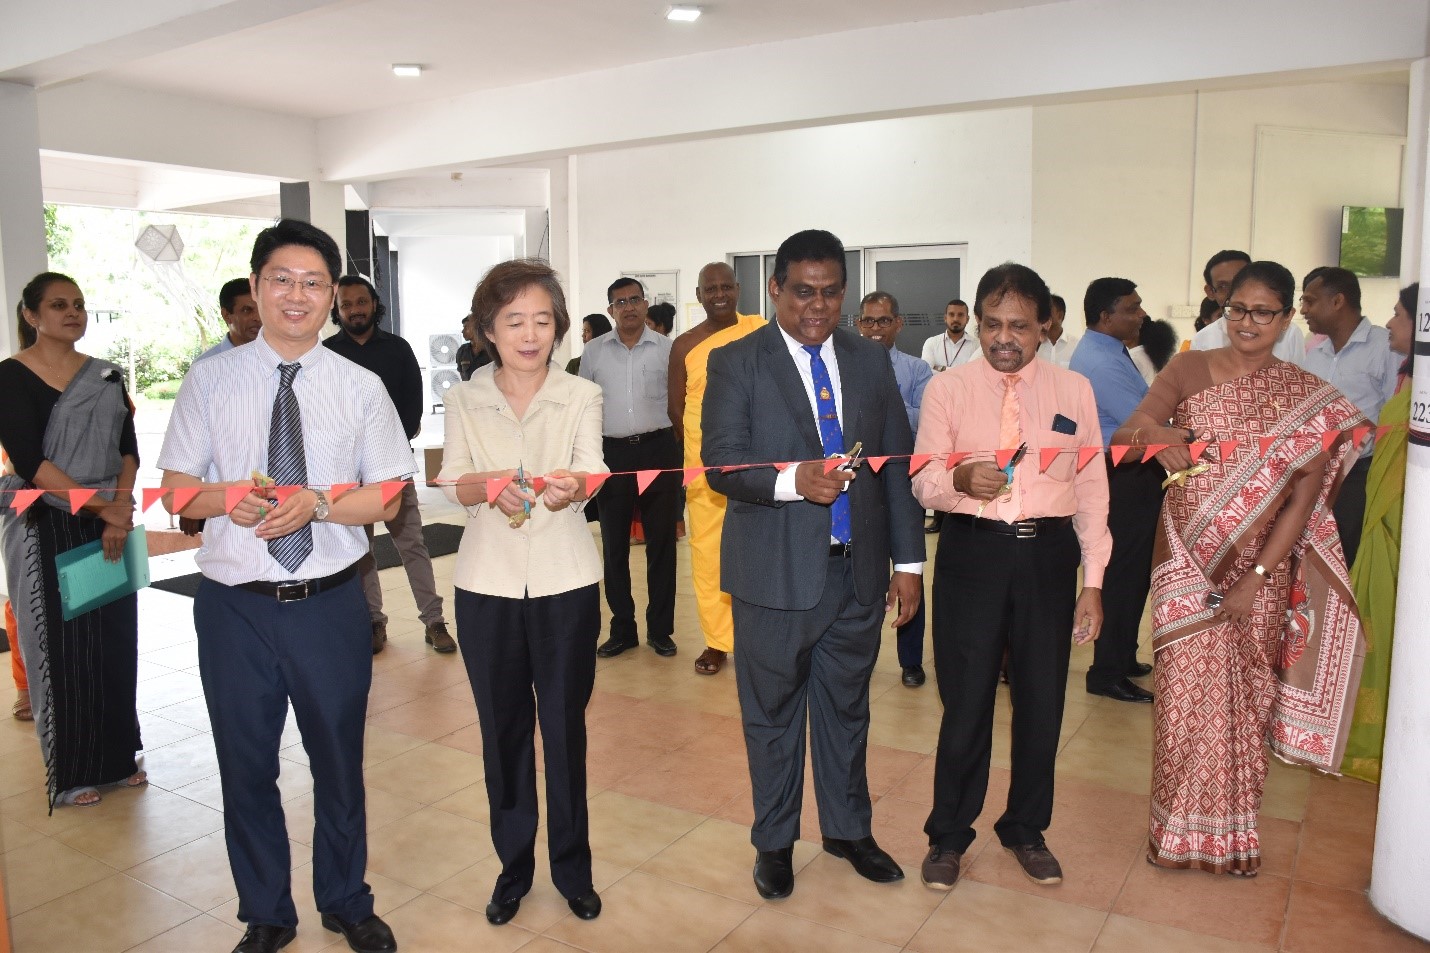 ‘Beauty of Sri Lanka and China through the Third Eye’ The Opening of the Sri Lanka China Culture Photography Exhibition